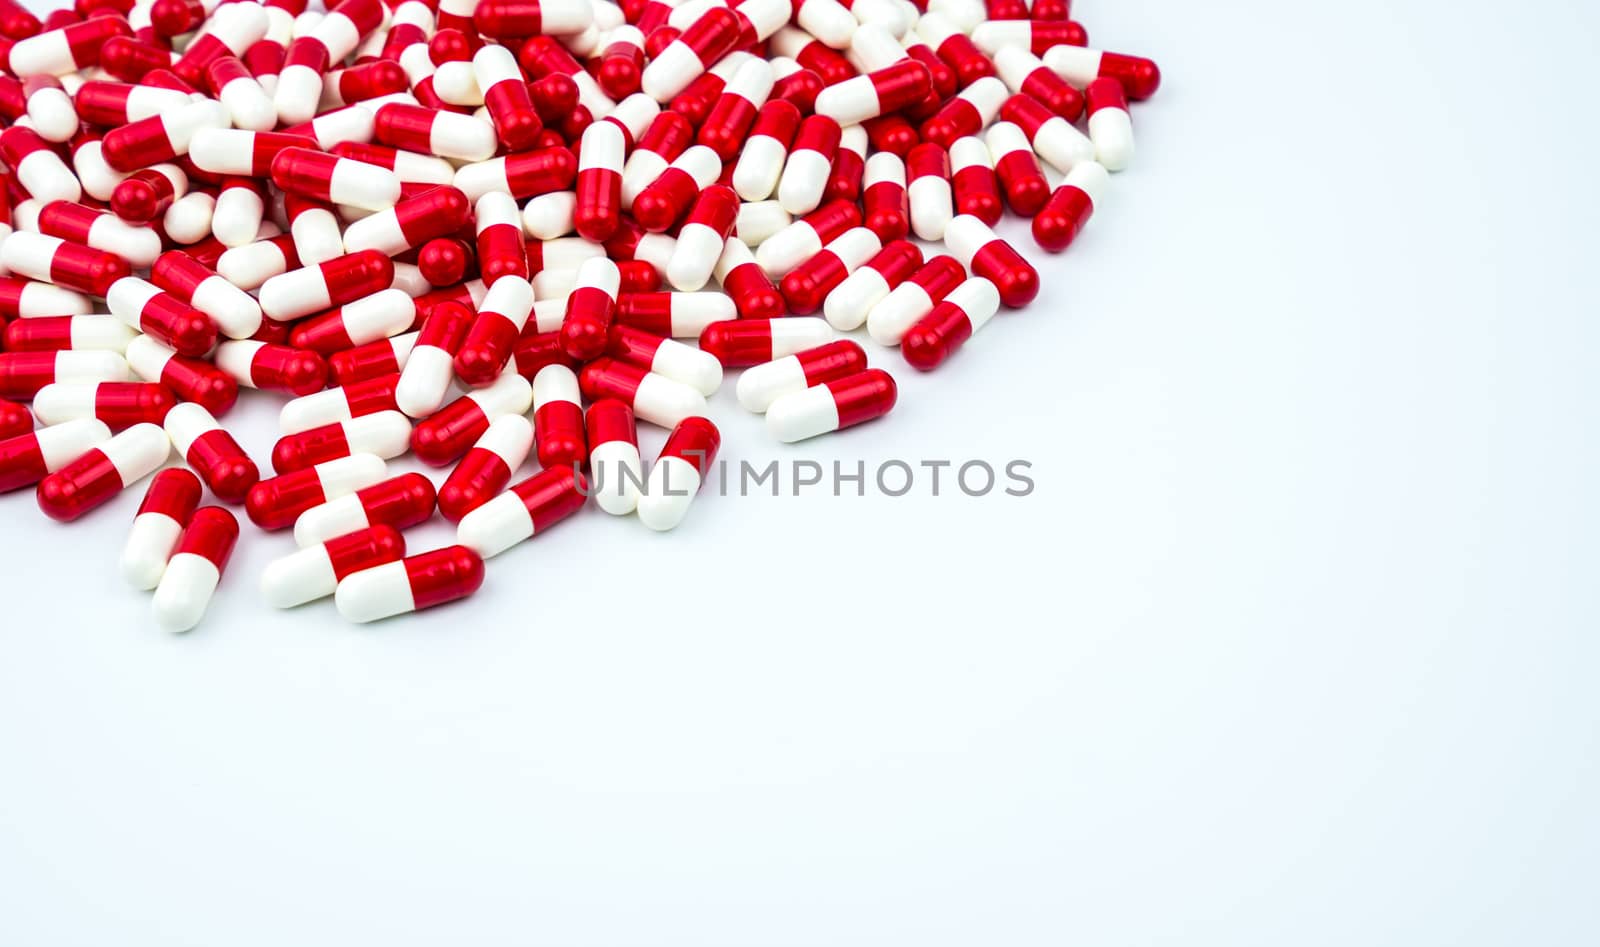 Red, white antibiotic capsules pills on white background with copy space. Drug resistance, antibiotic drug use with reasonable. Antibiotics drug overuse. Pharmaceutical industry. Pharmacy products.